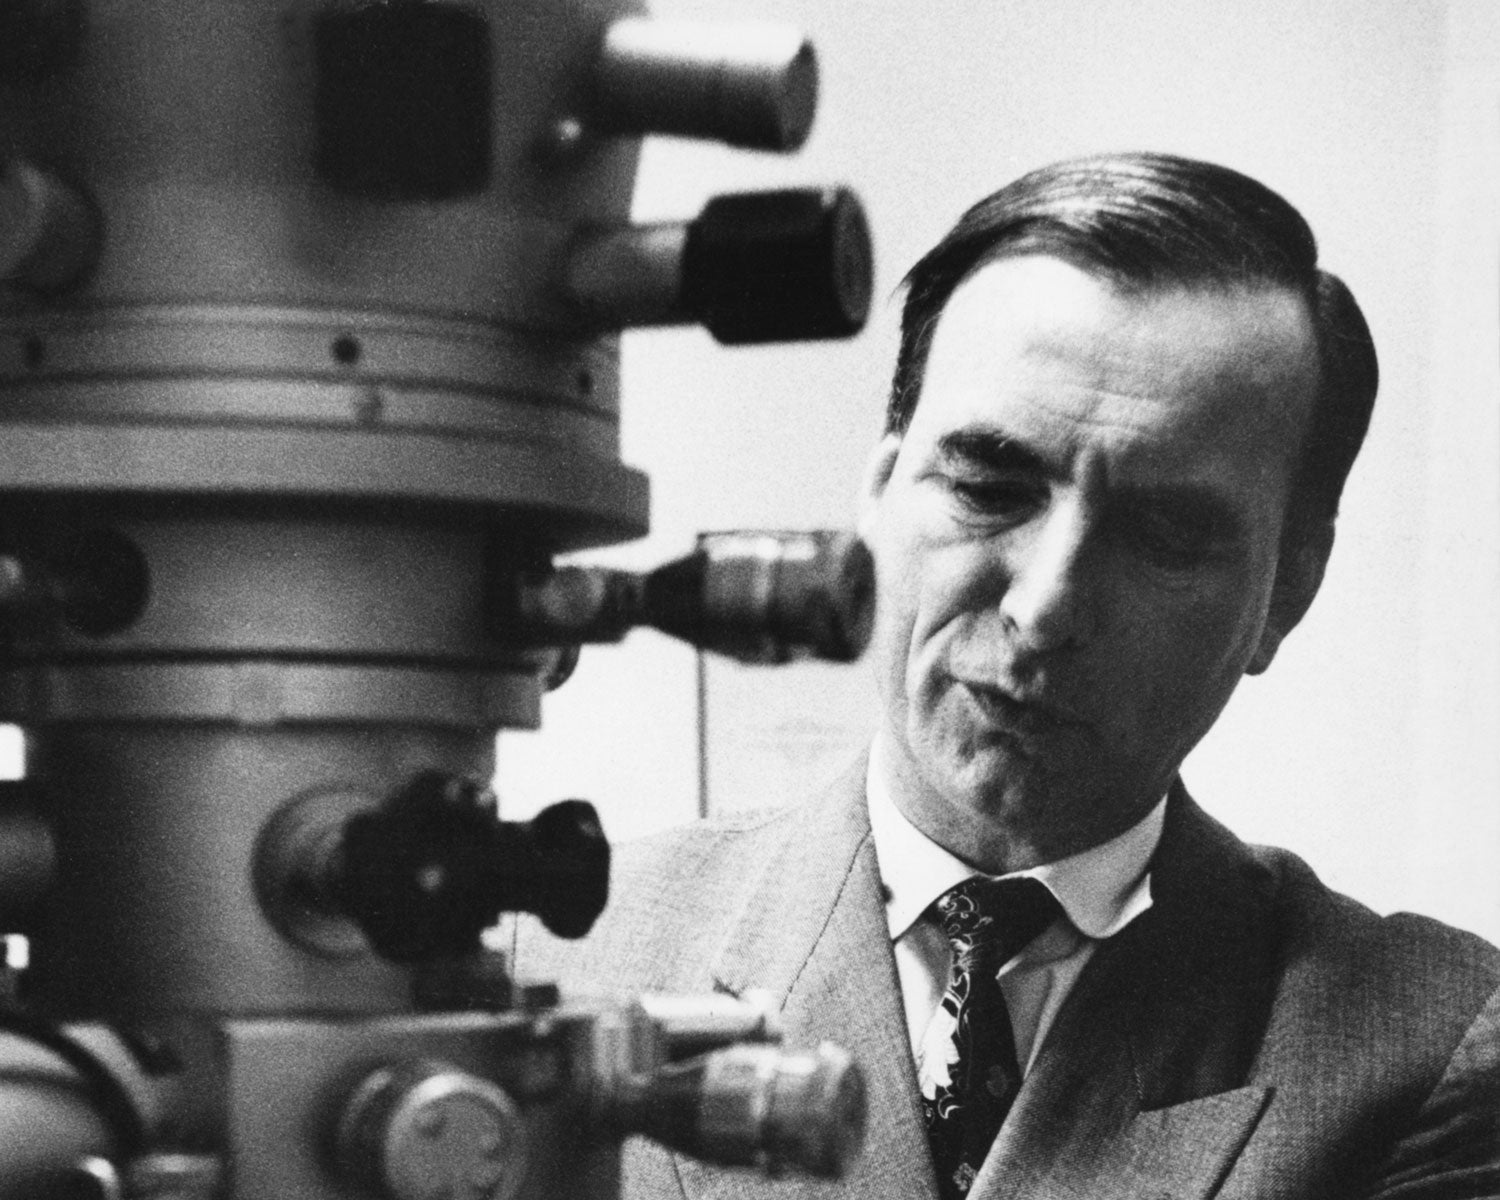 Professor Ernst Ruska (1906-1988) photographed  at the Max Plank Institute for Physics in Berlin